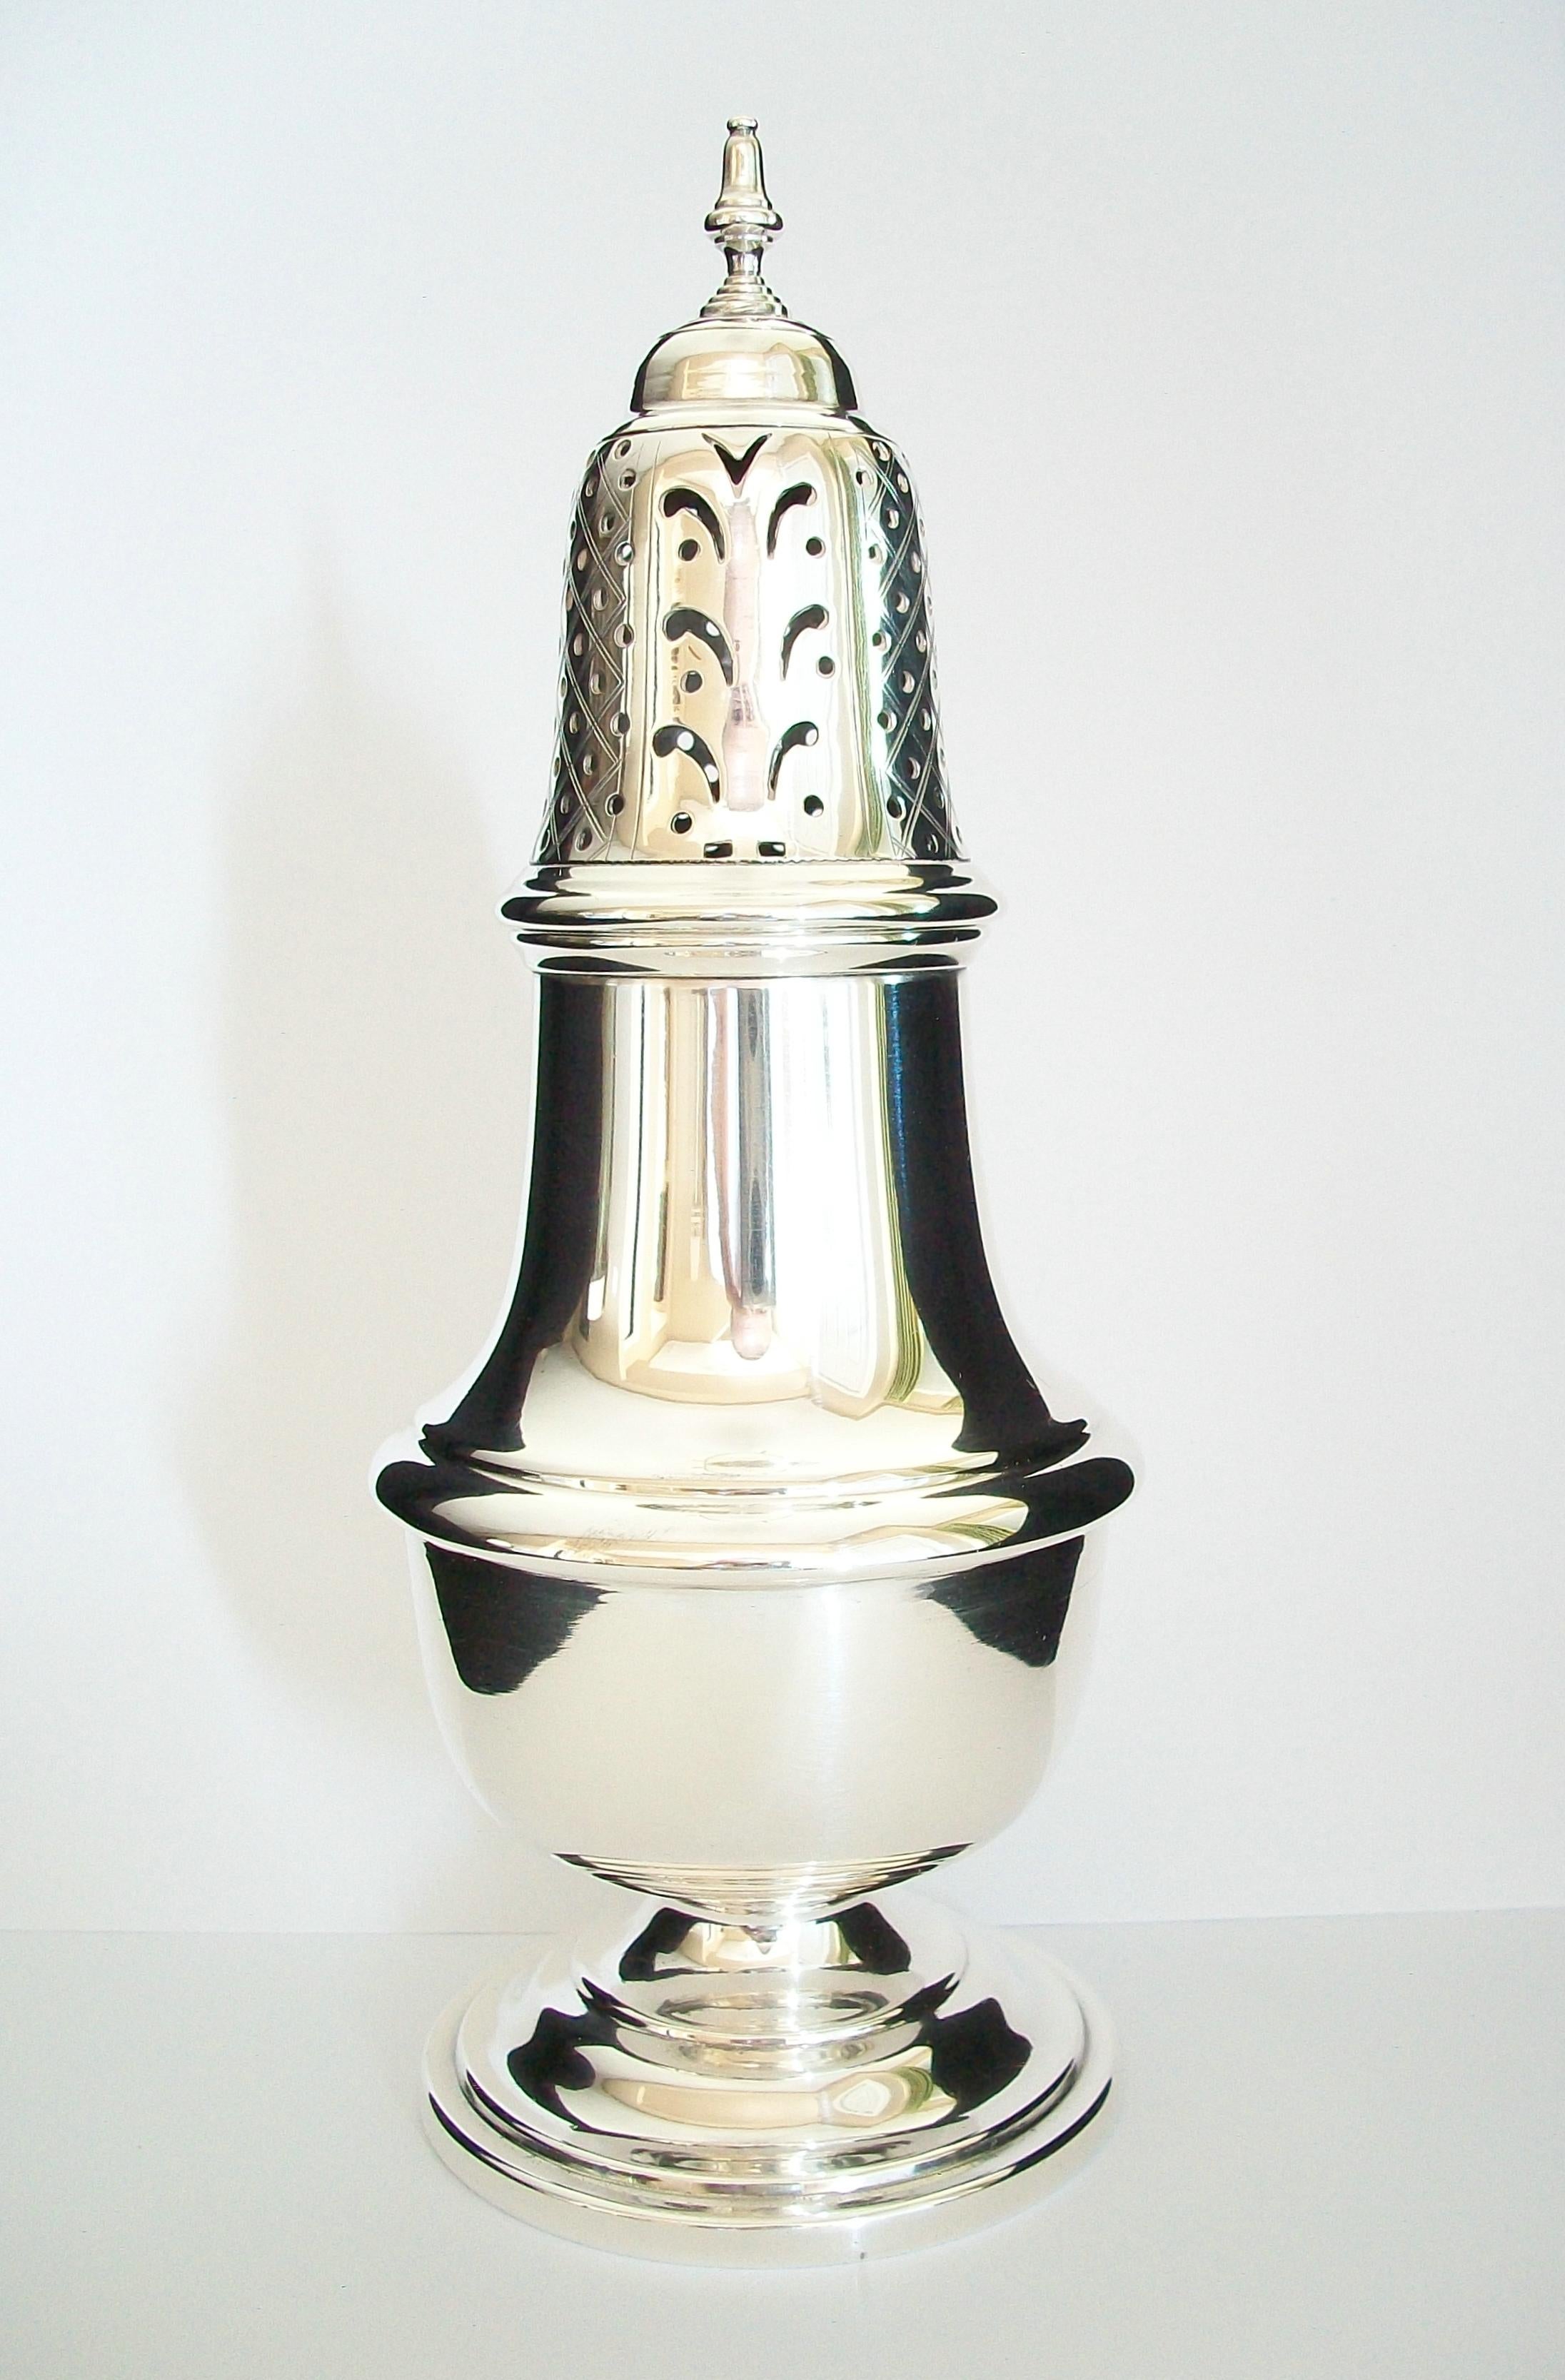 Vintage silver plate Muffineer sugar castor - pierced and chased details to the top - maker's mark on the bottom (unknown/unidentified) - United Kingdom - mid 20th century.

Excellent vintage condition - all original - minor surface scratches -